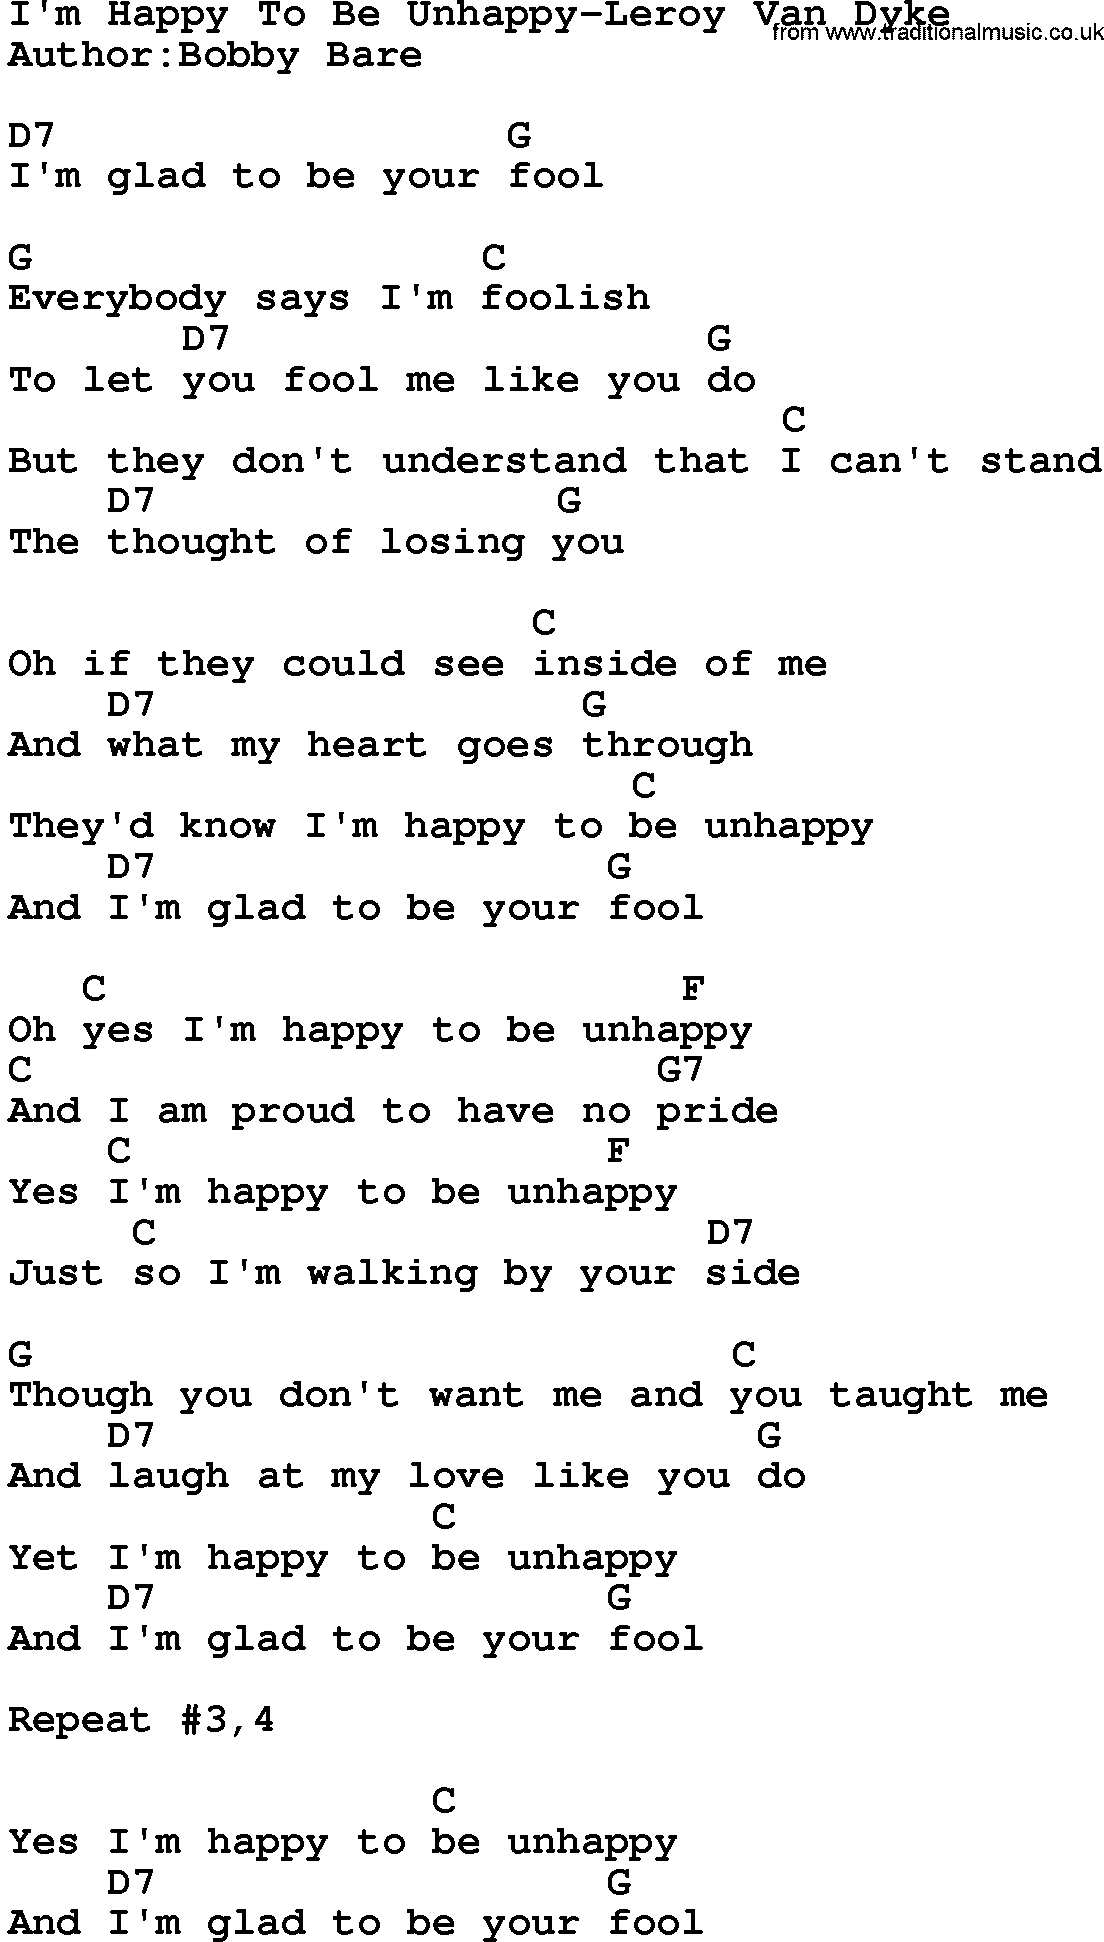 Country music song: I'm Happy To Be Unhappy-Leroy Van Dyke lyrics and chords